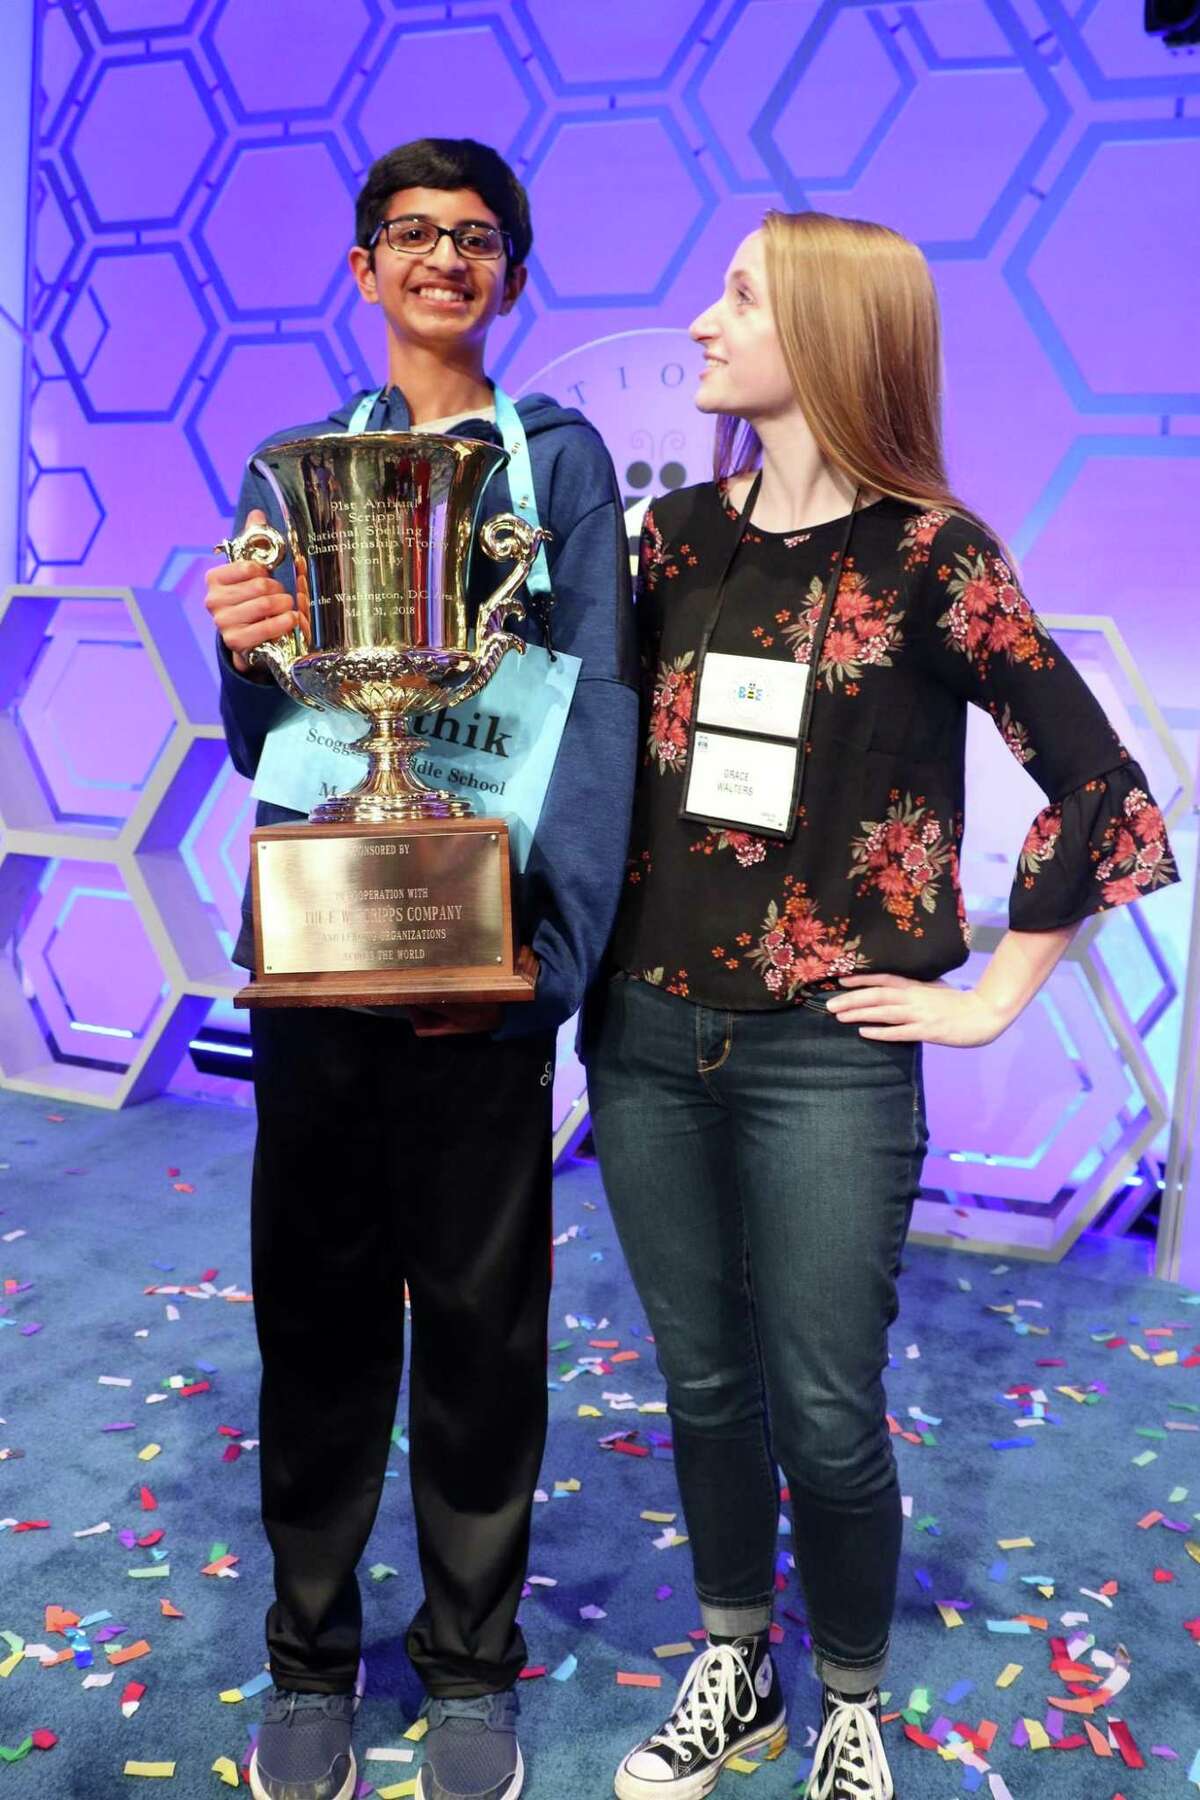 Grace Walters, 16, a Covenant Christian School student, is pictured with Karthik Nemmani, 14, the 2018 Scripps National Spelling Bee winner on May 31 in Washington DC. Walters has coached Nemmani since September in preparation for the national competition.